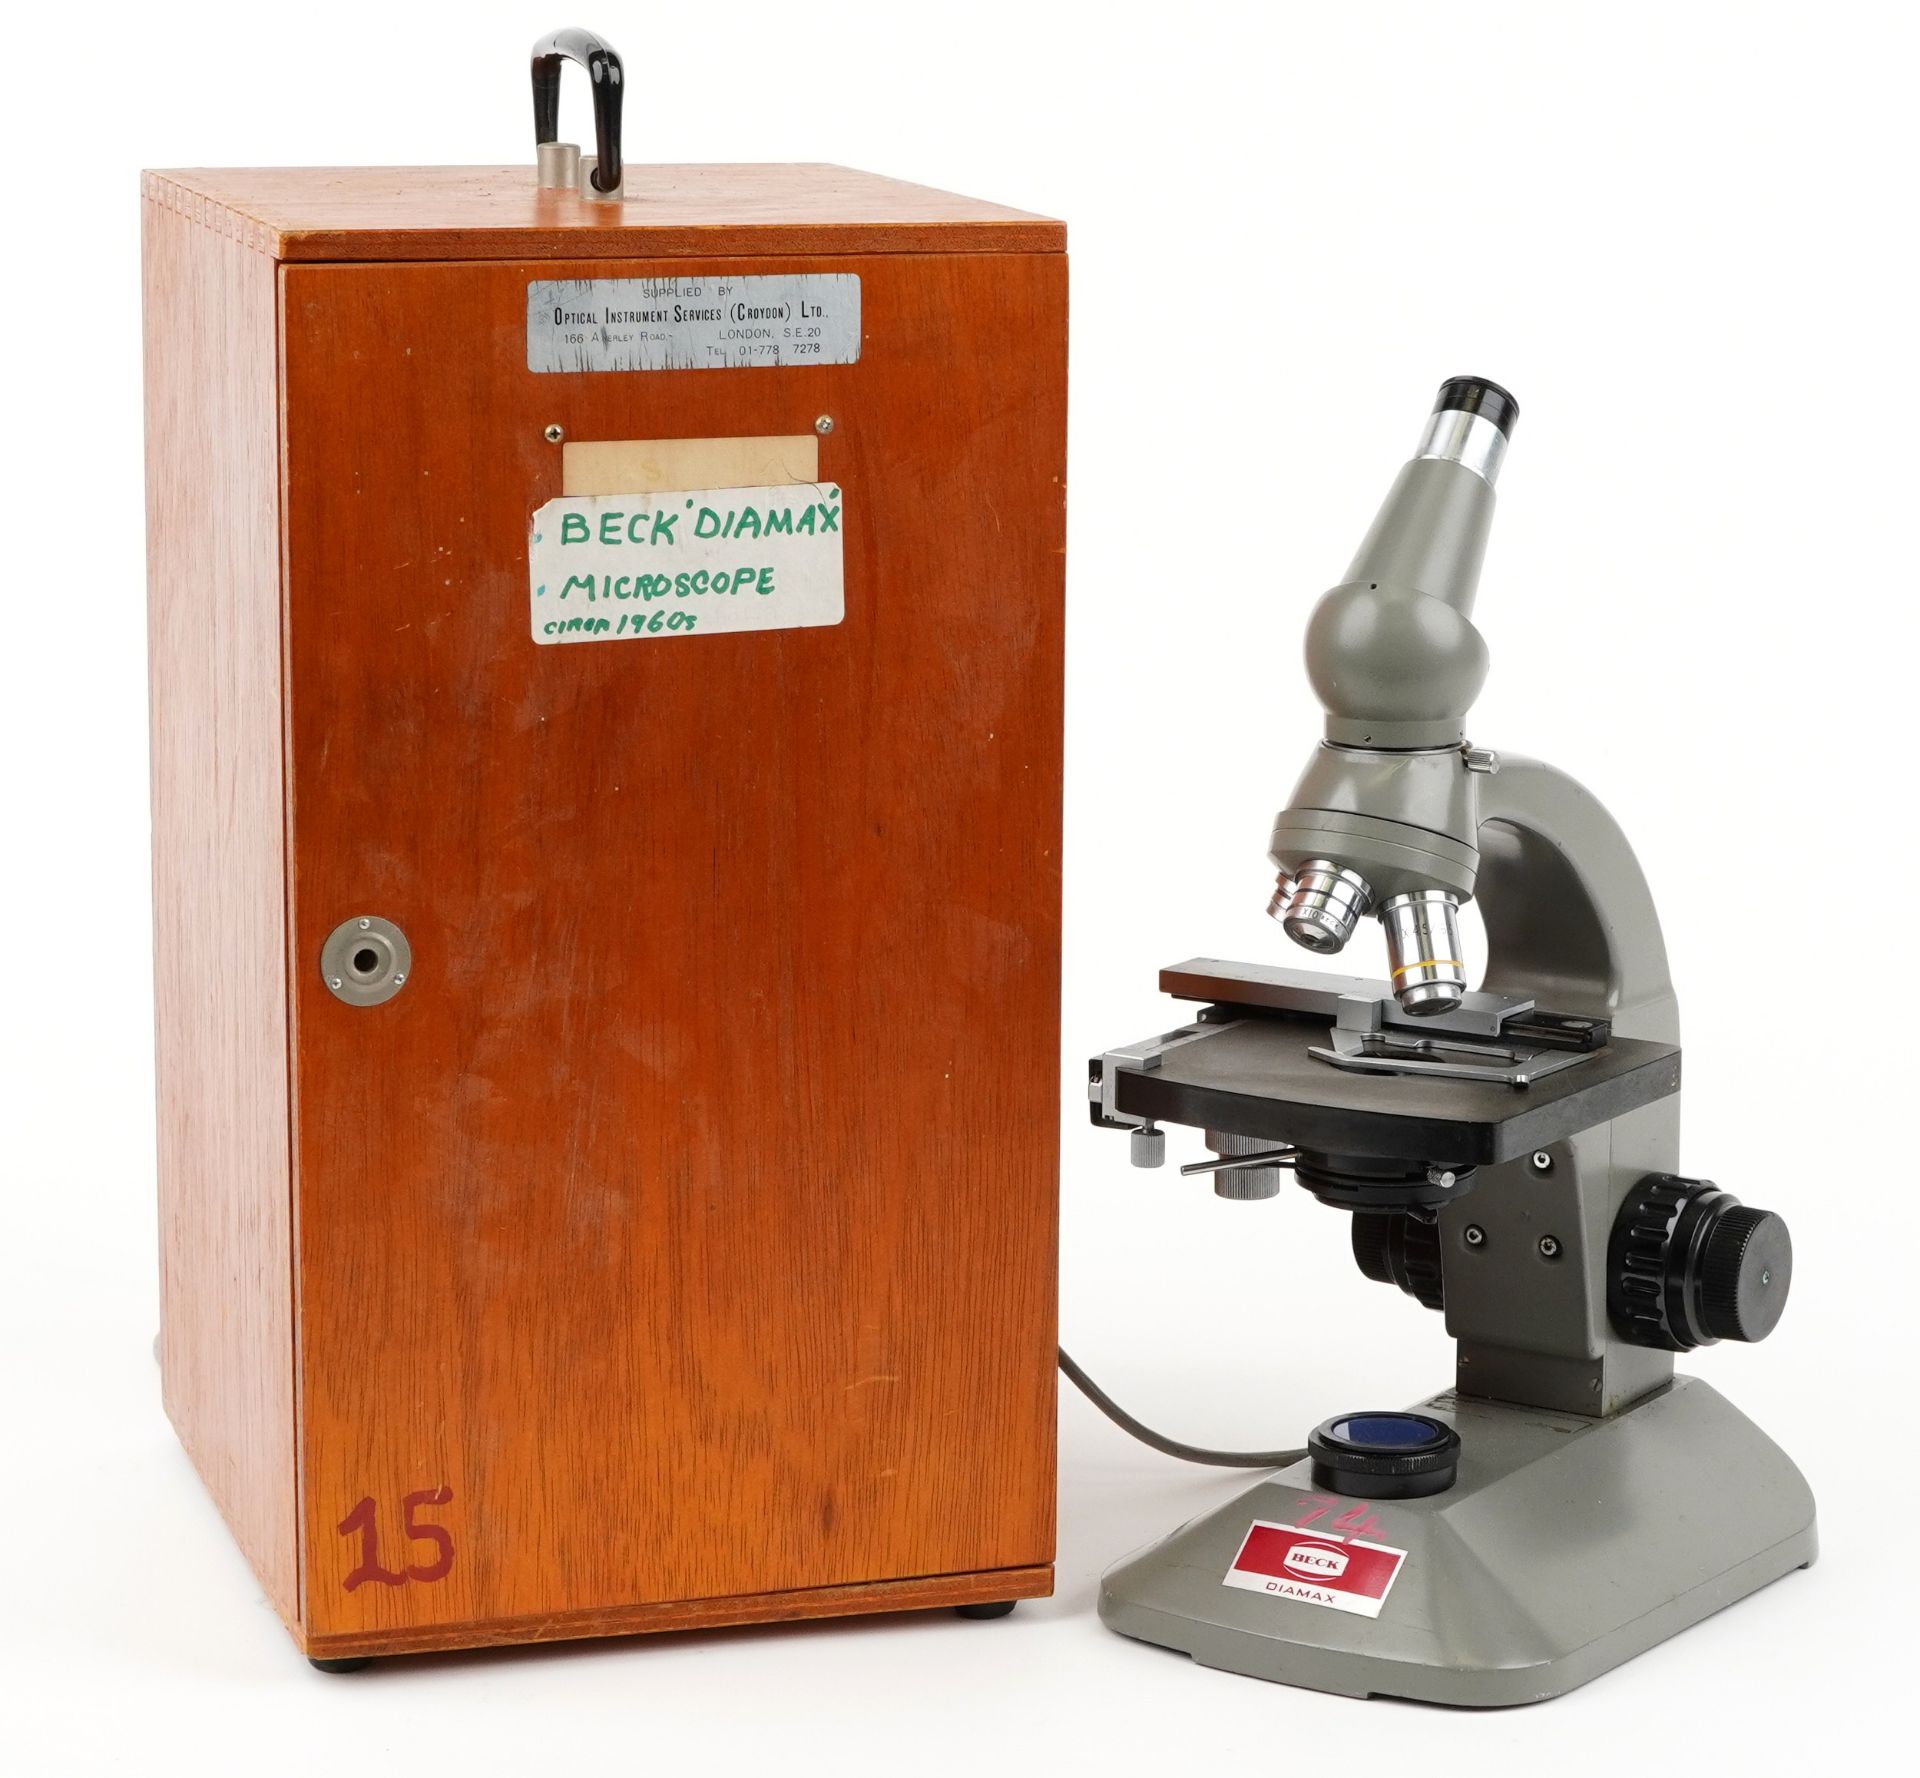 Beck Diamax, vintage microscope with fitted case : For further information on this lot please